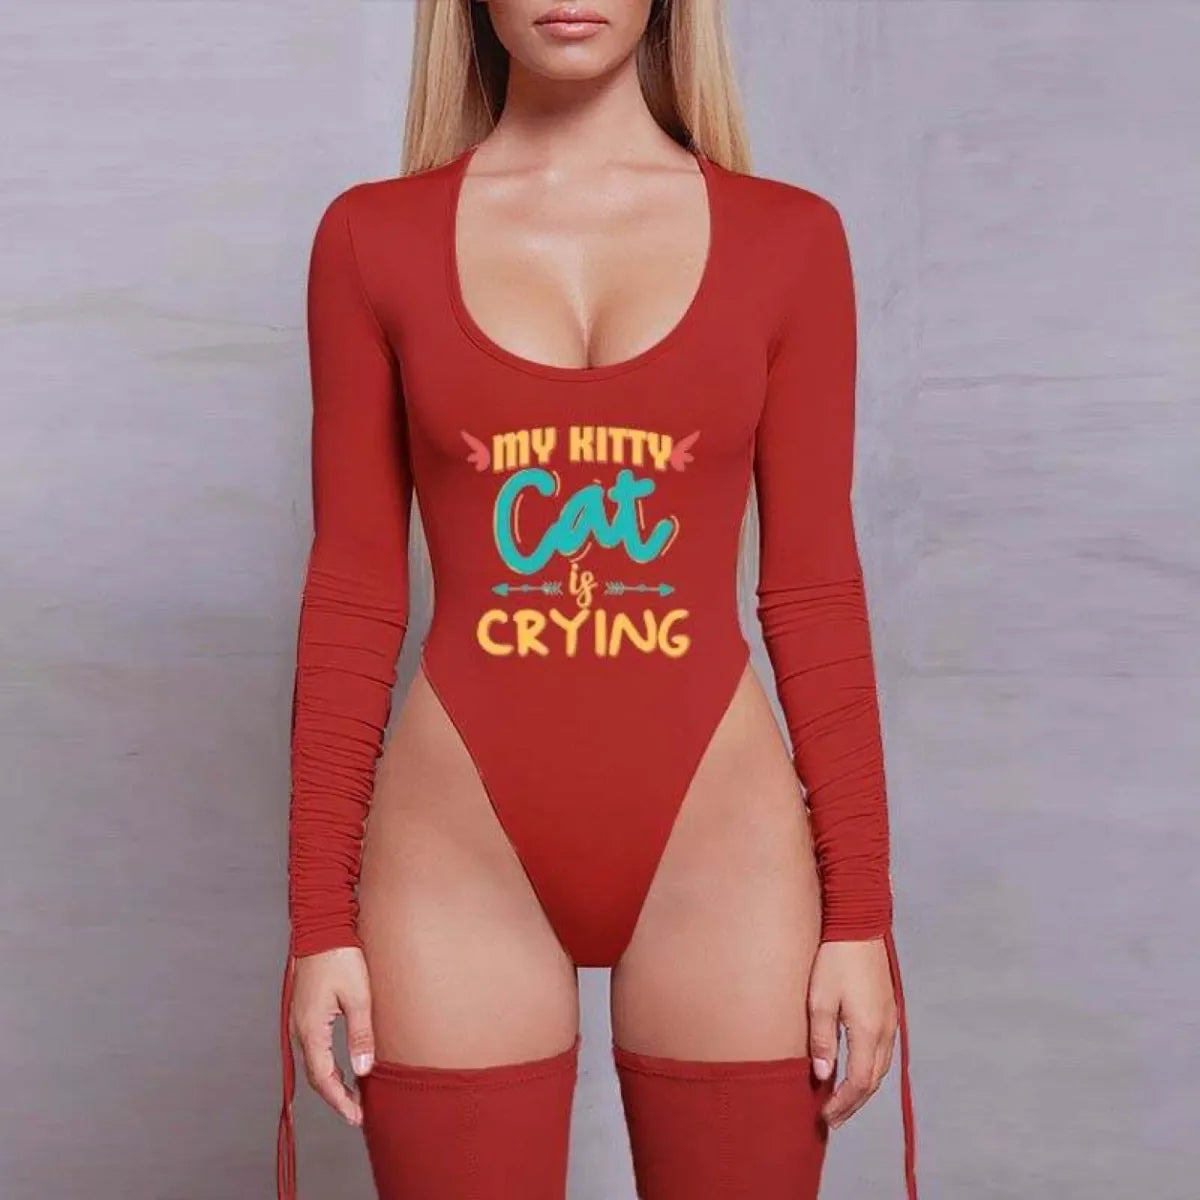 My kitty cat is crying, animal lovers fun logo, Girls wanna have fun collections,Women One Piece Jumpsuits Casual Sexy Long Sleeve Tops Ladies Bodysuits, kitty cat graphic - The Vertus Boutiq